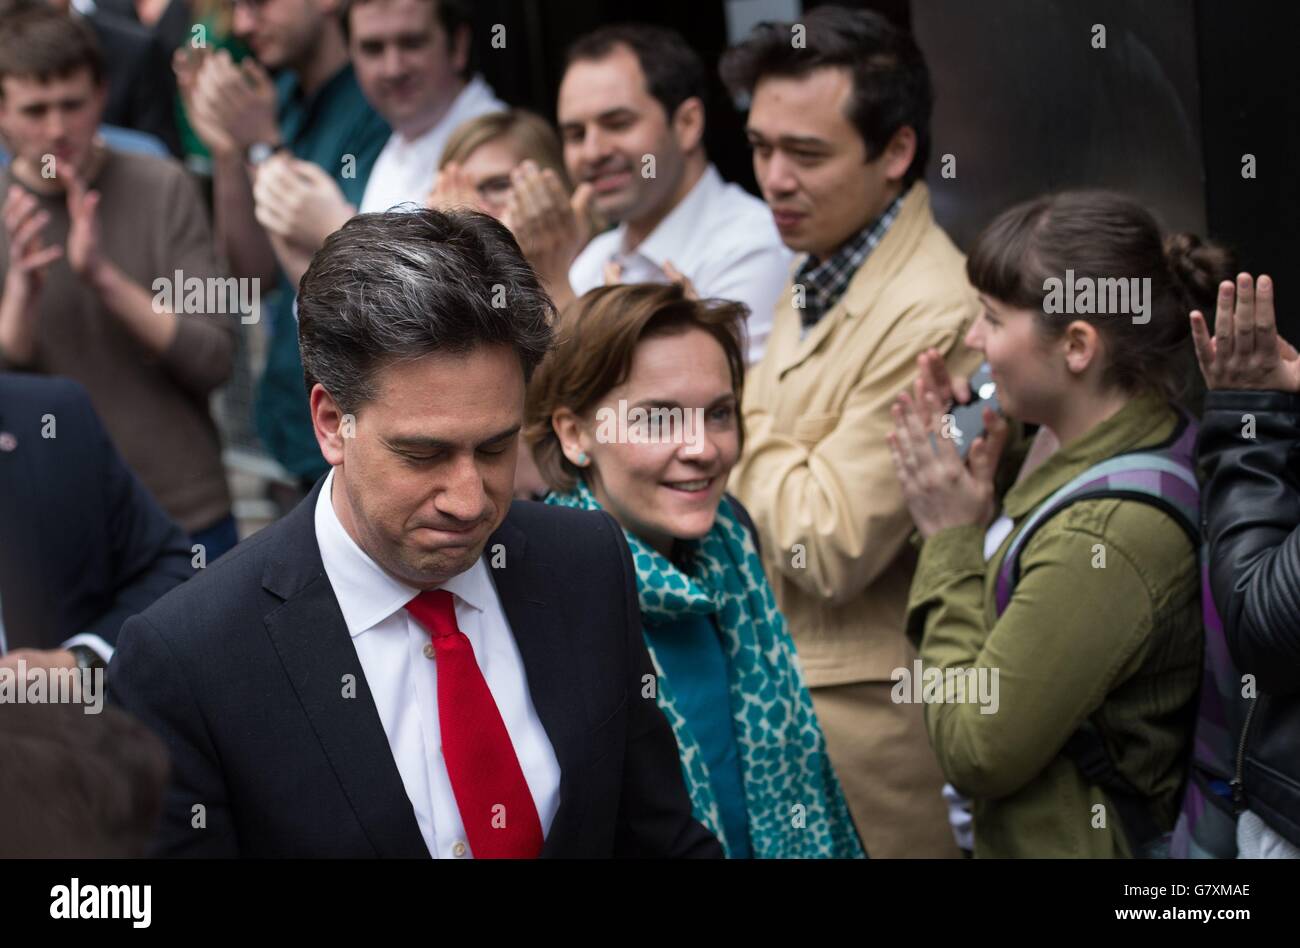 Labour leader Ed Miliband is greeted by staff as he arrives with his wife Justine at the Labour party central office in Brewer's Green, before delivering his resignation speech at 1 Great George street, London, following sweeping losses in Scotland and with David Cameron close to an overall majority. Stock Photo